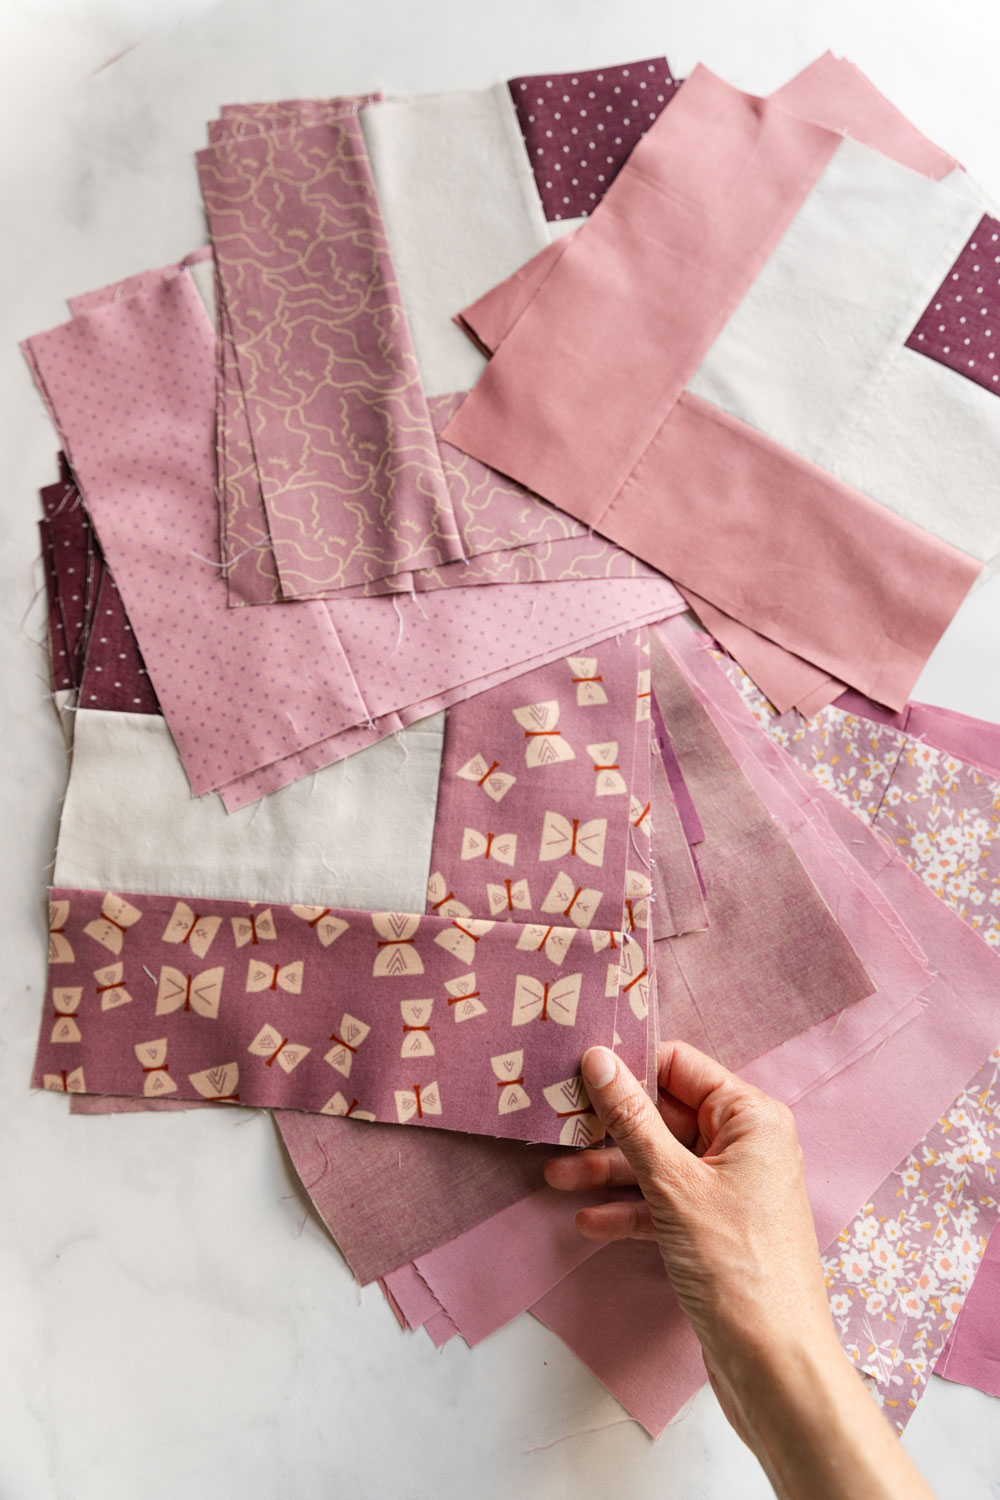 In this week of the Thrive quilt sew along we sew our blocks together – included is a video tutorial and love of sewing tips! suzyquilts.com #sewing